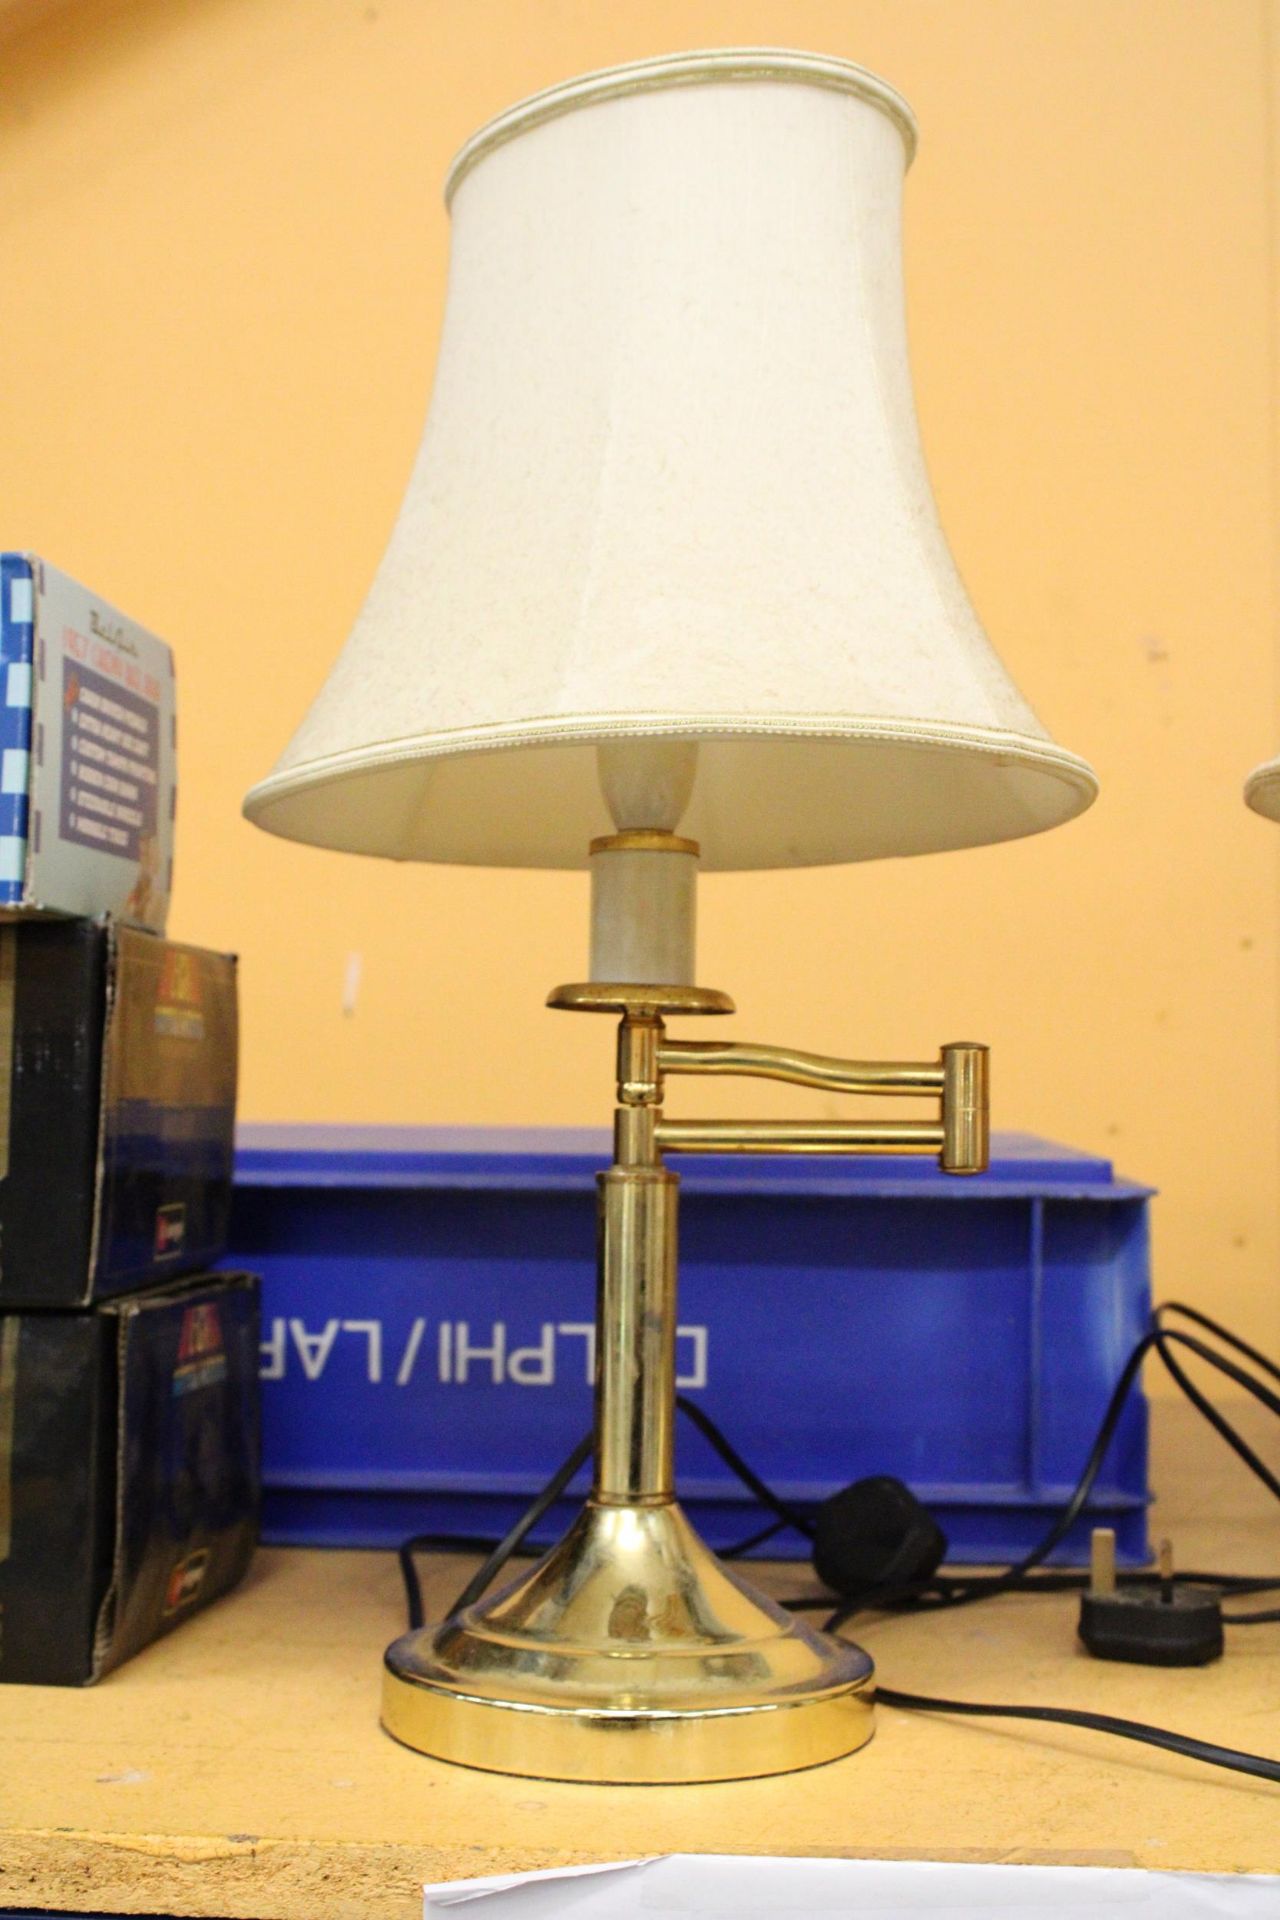 A PAIR OF VINTAGE SWING ARM BRASS LAMPS WITH SHADES - Image 2 of 5